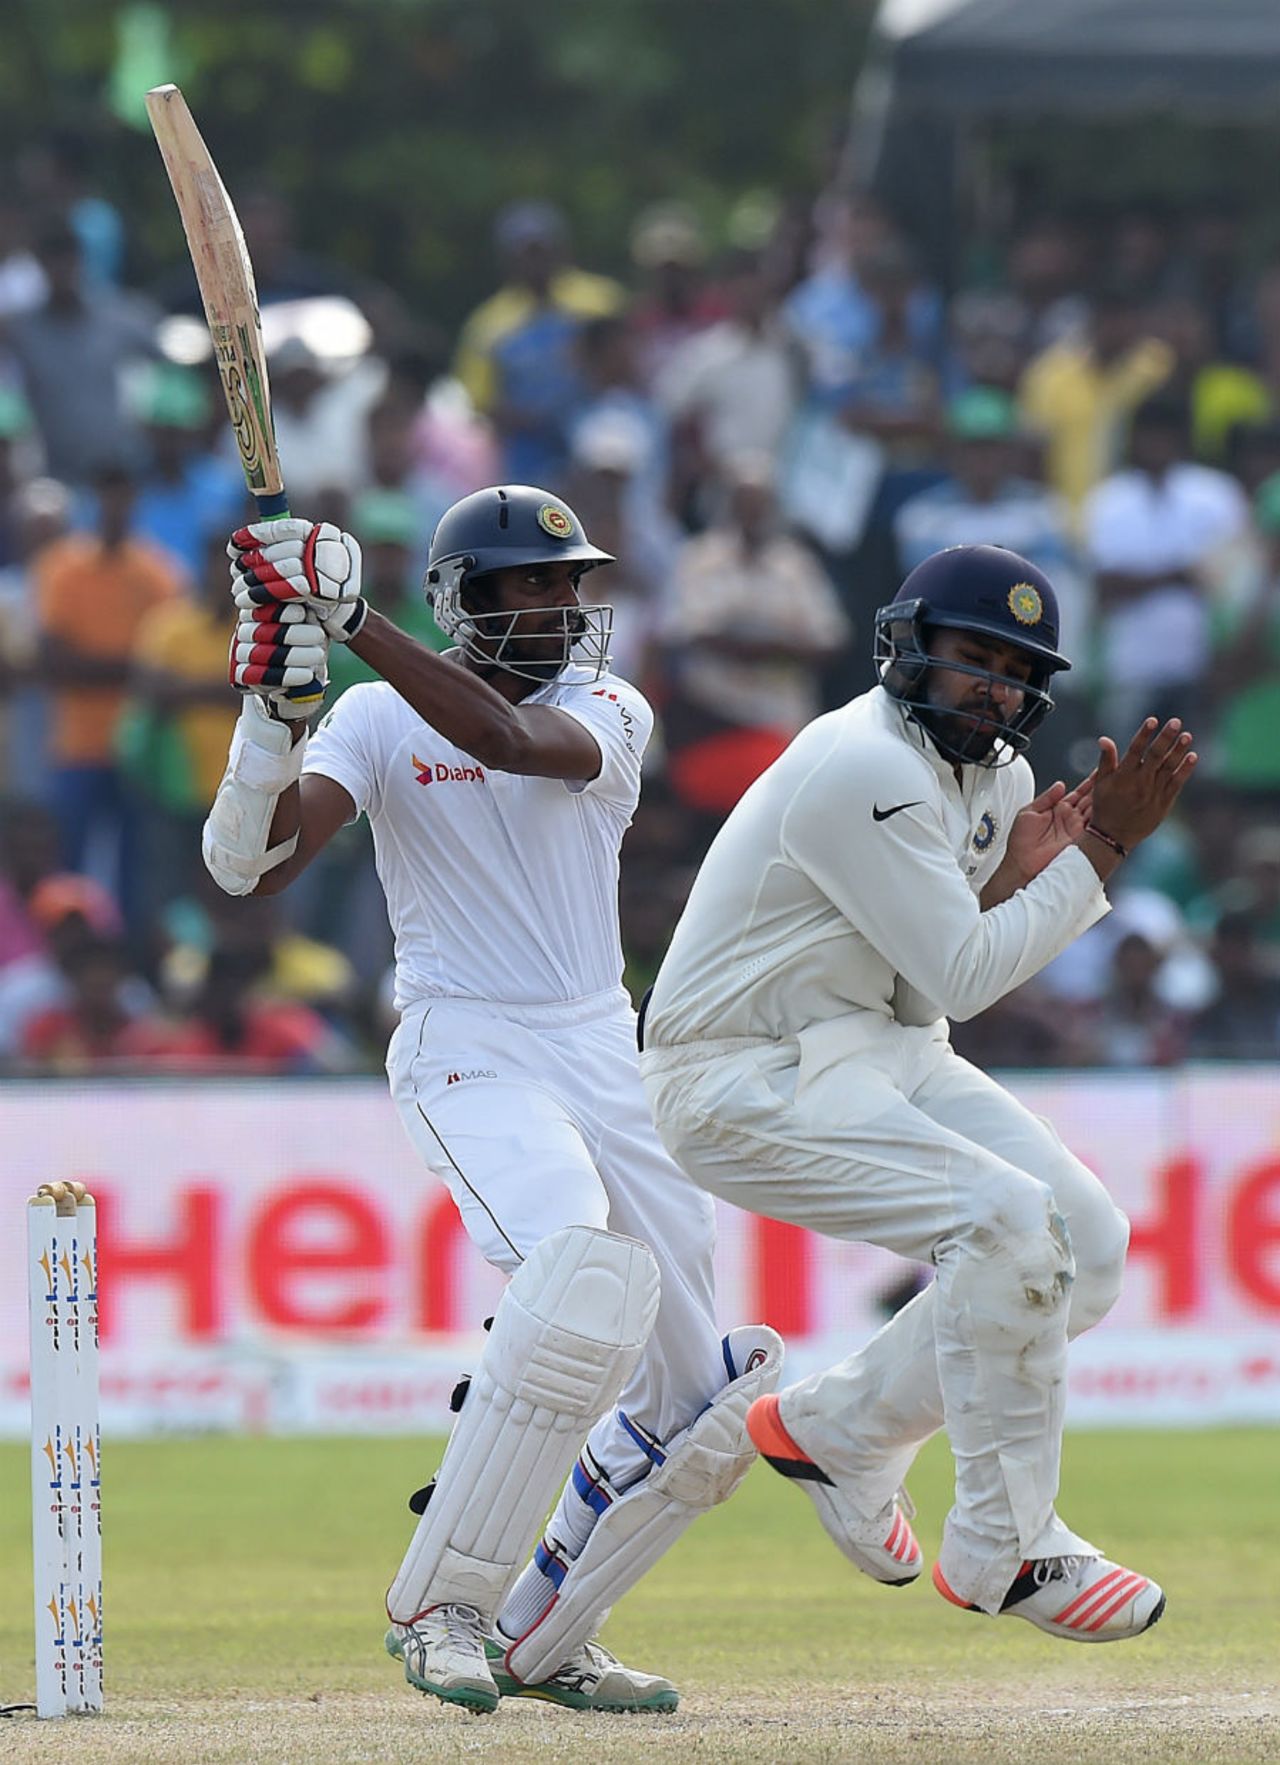 Rohit Sharma gets out of harm's way, Sri Lanka v India, 1st Test, Galle, 3rd day, August 14, 2015